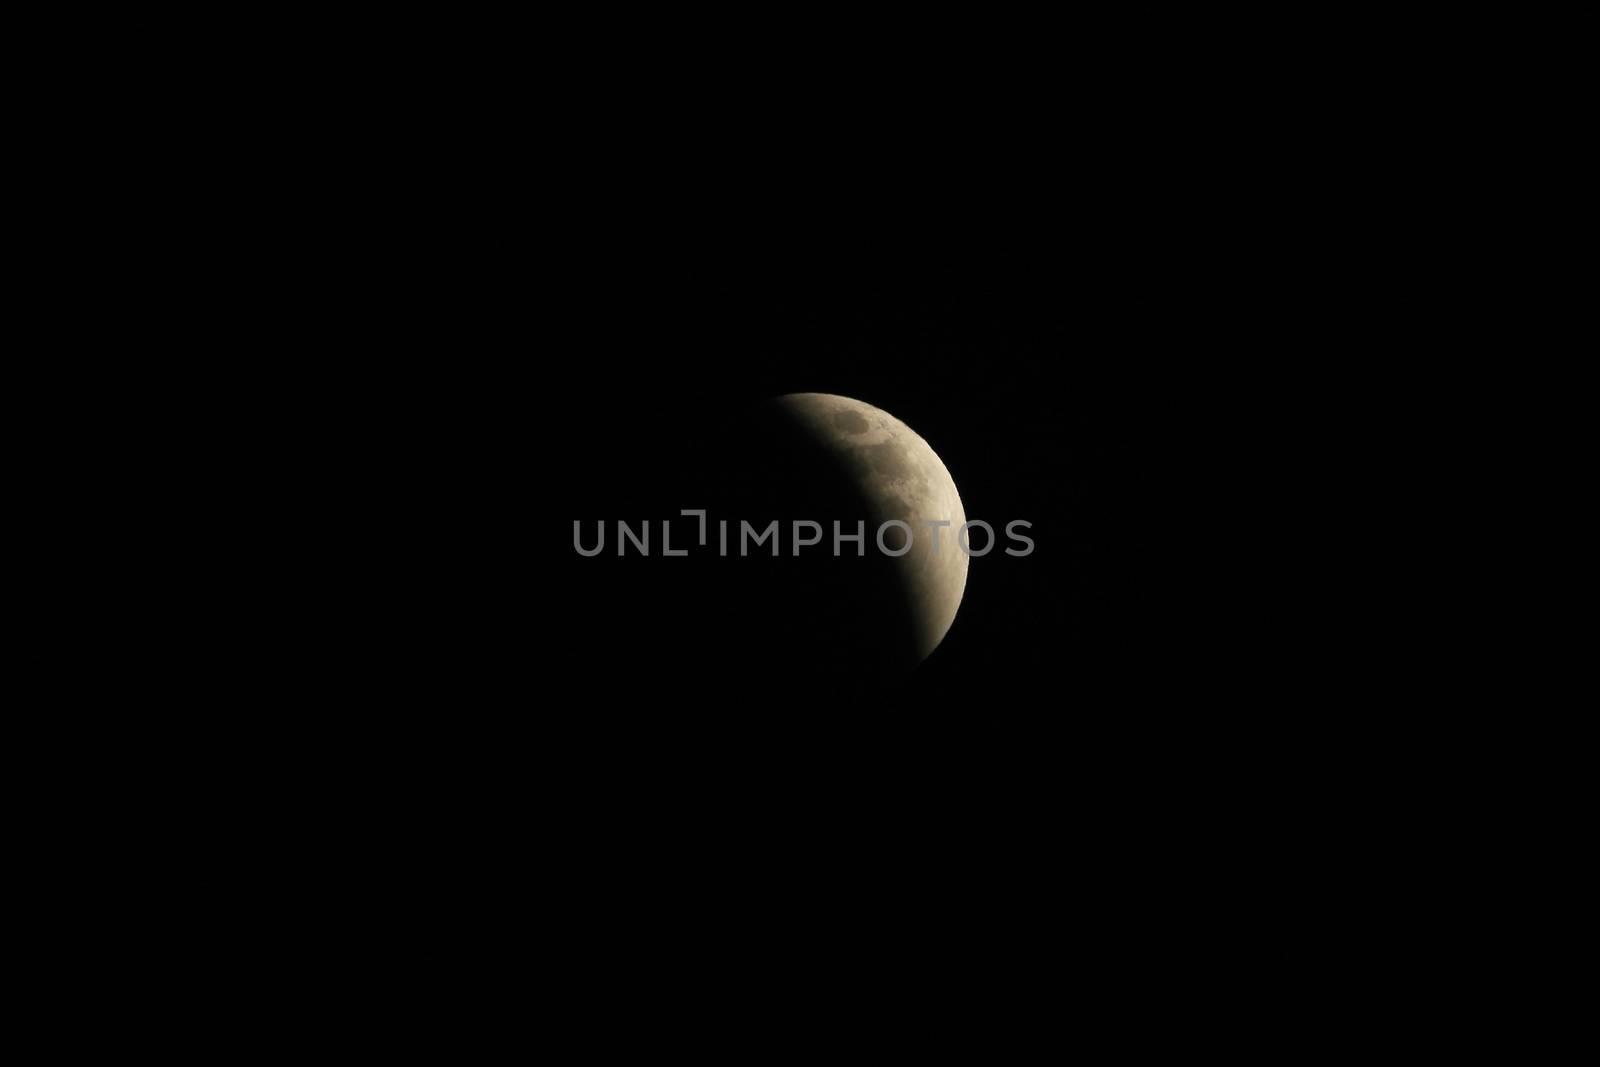 Partial before total lunar eclipse 2015, also known as blood moon, photographed sep 27th, 8-11 pm, in the mountains of Colombia at 3'560 mabsl, national park Cocuy.